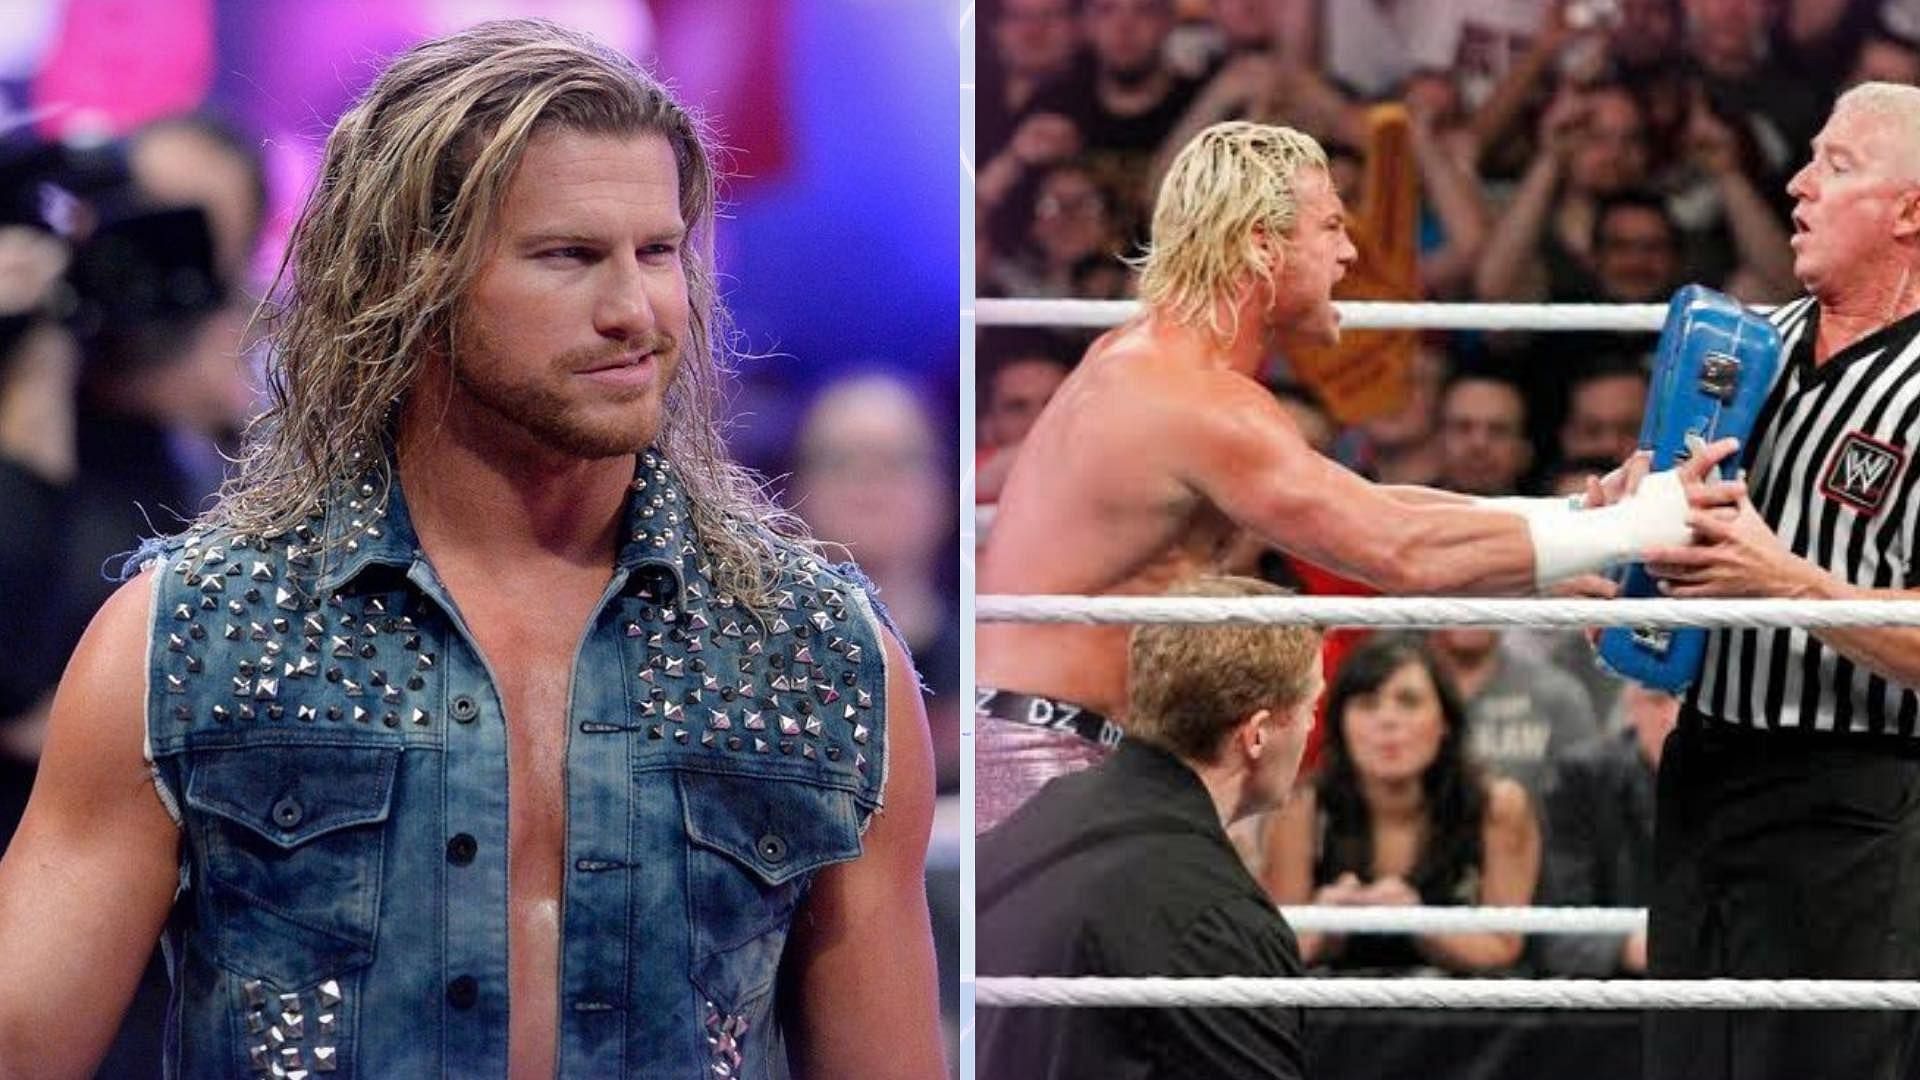 Dolph Ziggler is a former Intercontinental Champion